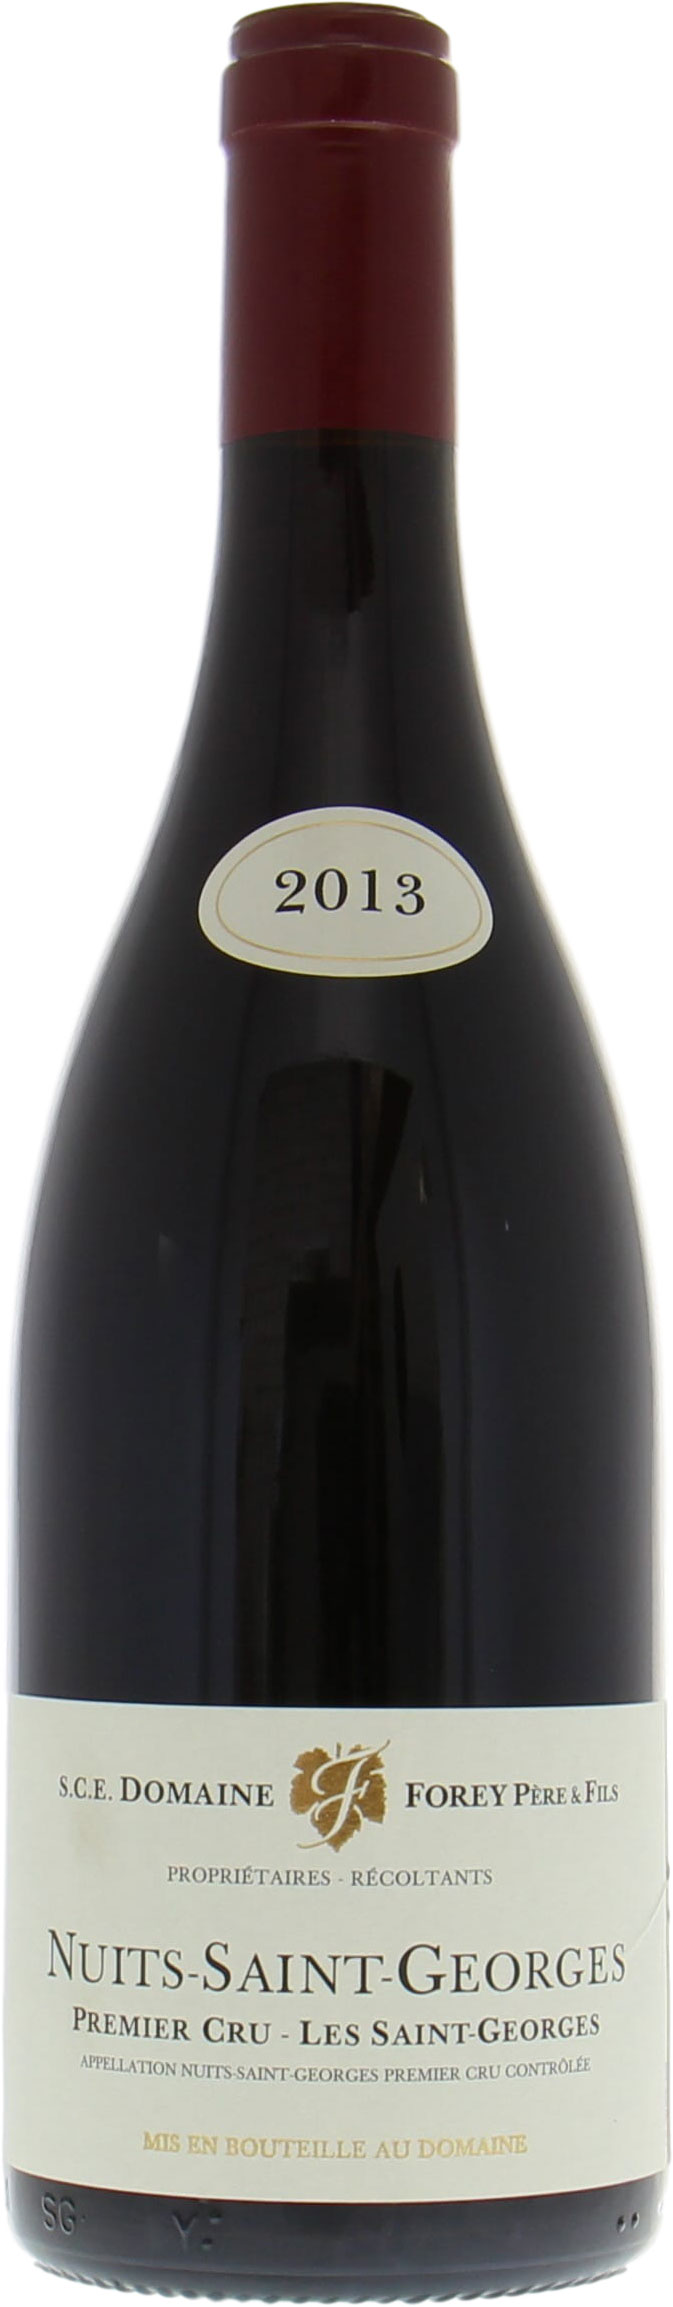 Domaine Forey Pere & Fils - Nuits St. Georges 1er Cru St. Georges 2013 Perfect